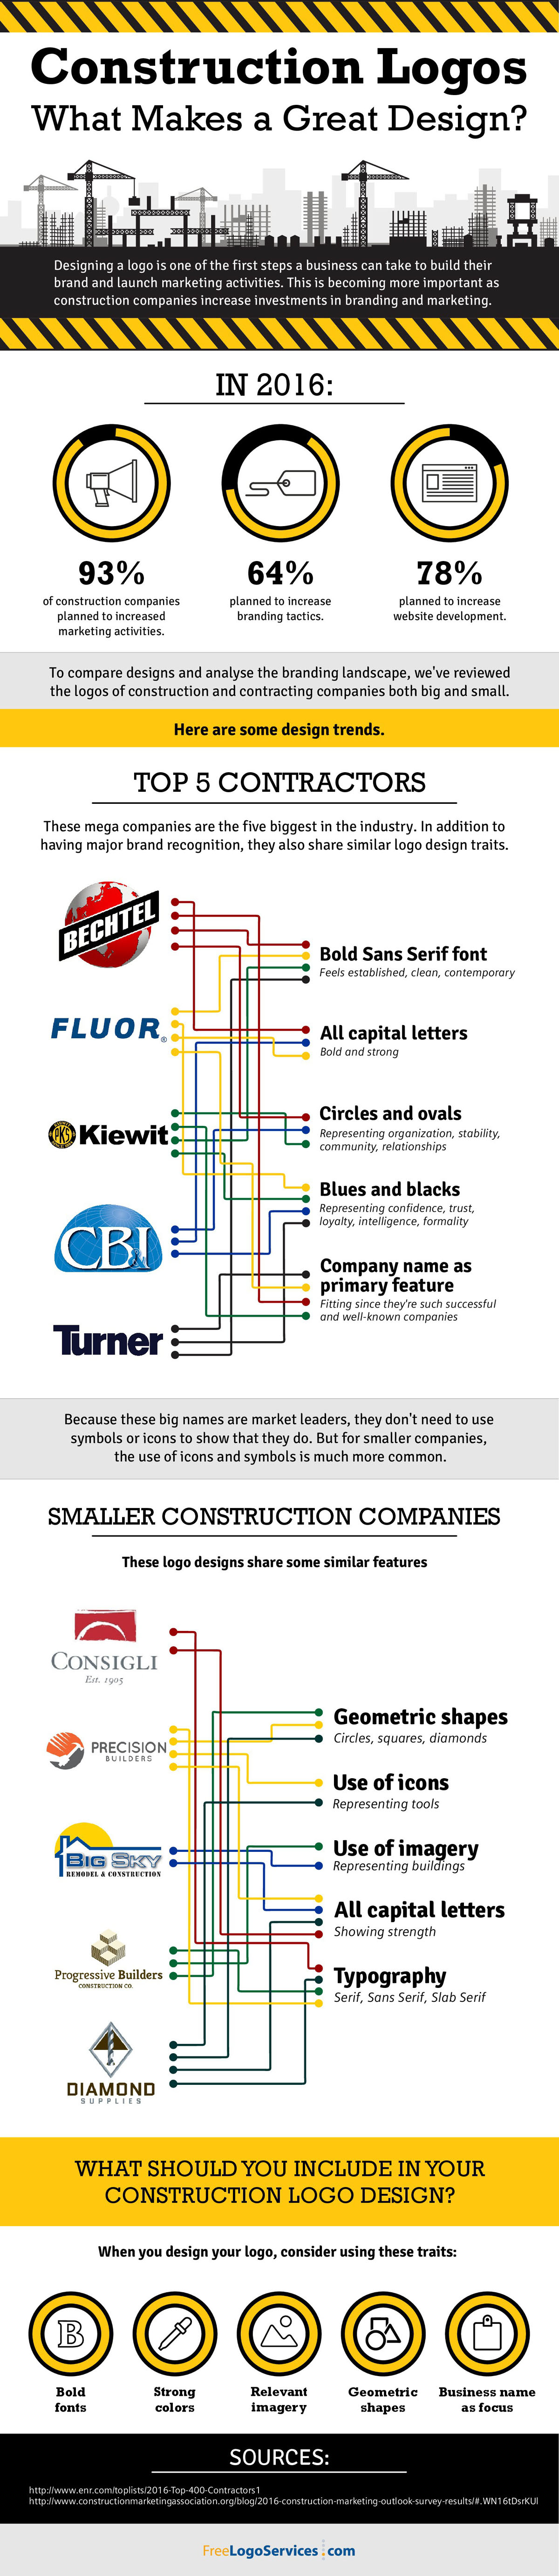 Construction Logos: What Makes a Great Design?